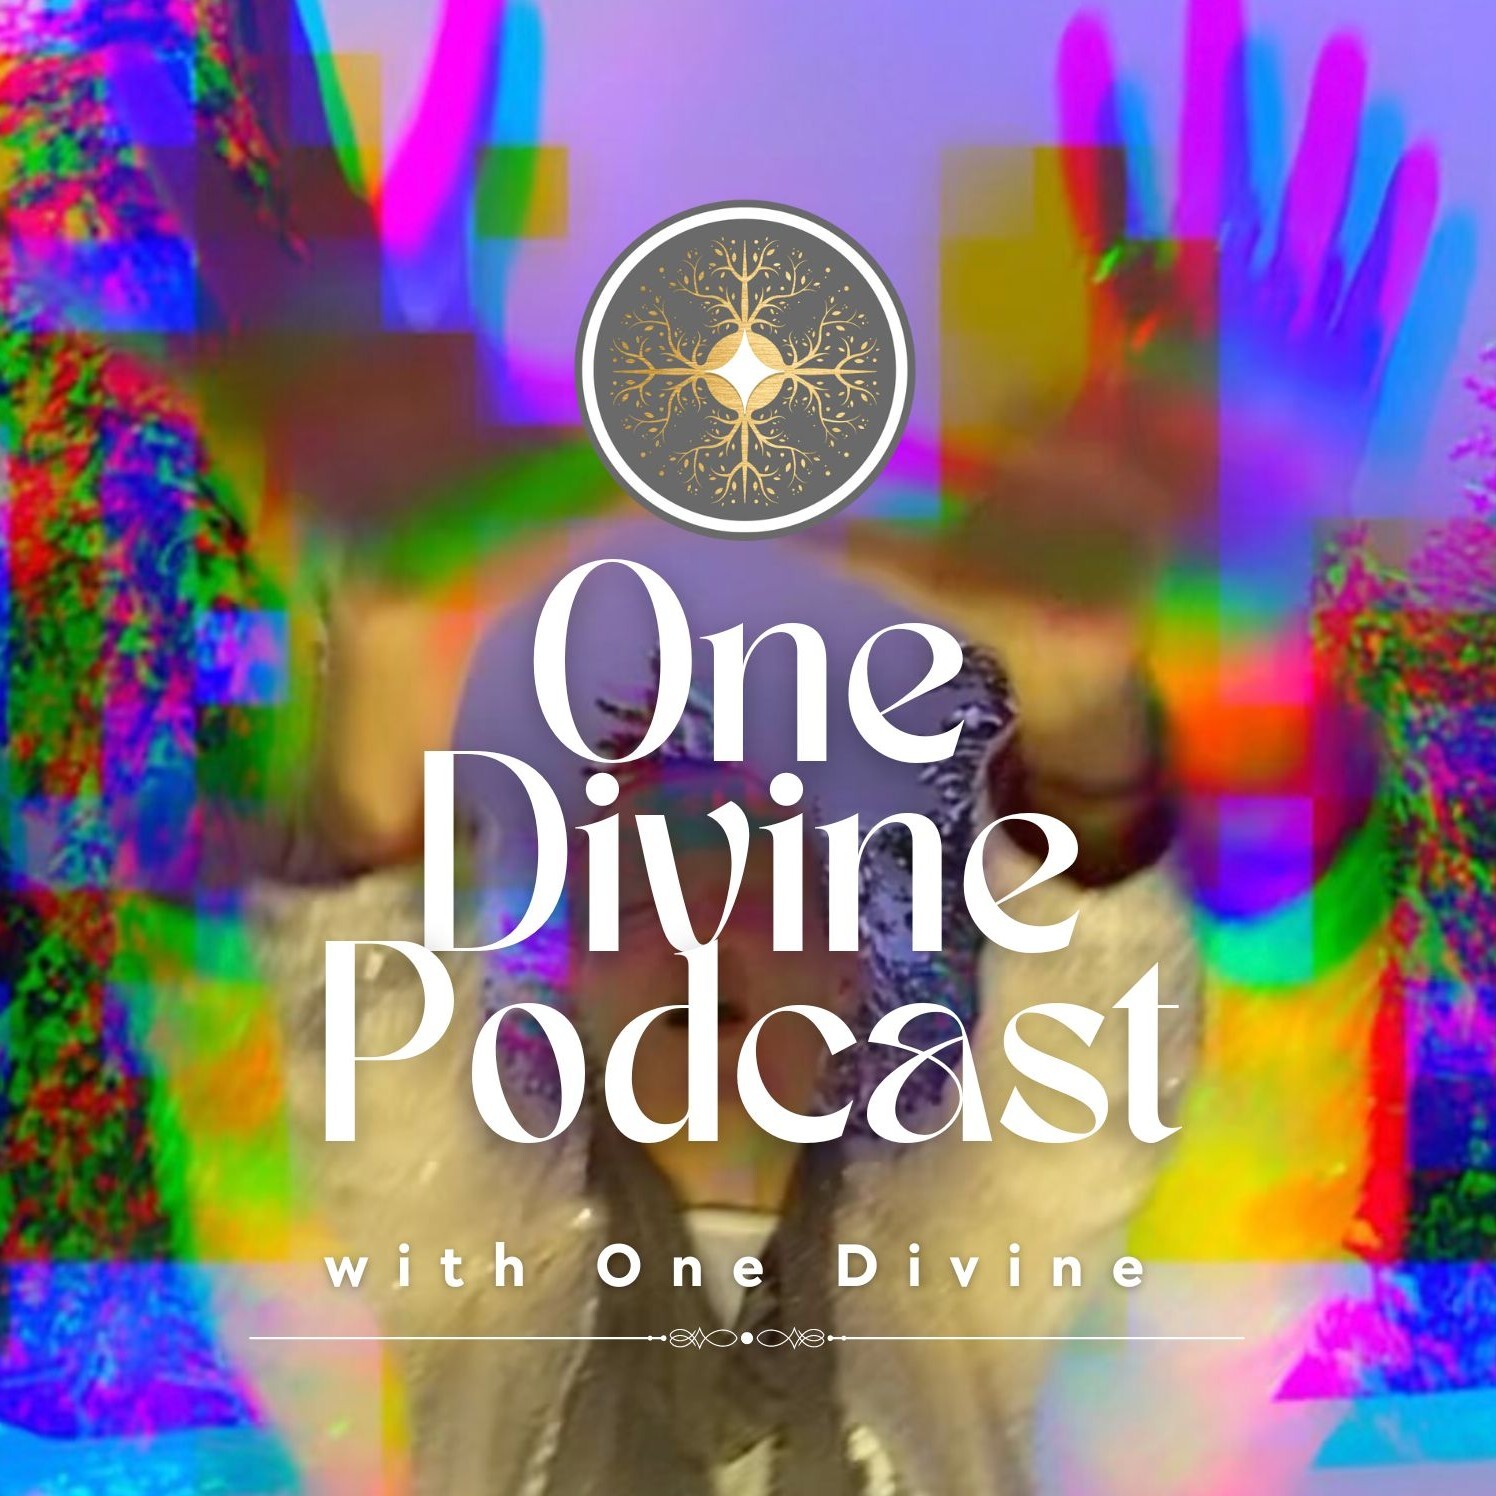 One Divine Podcast